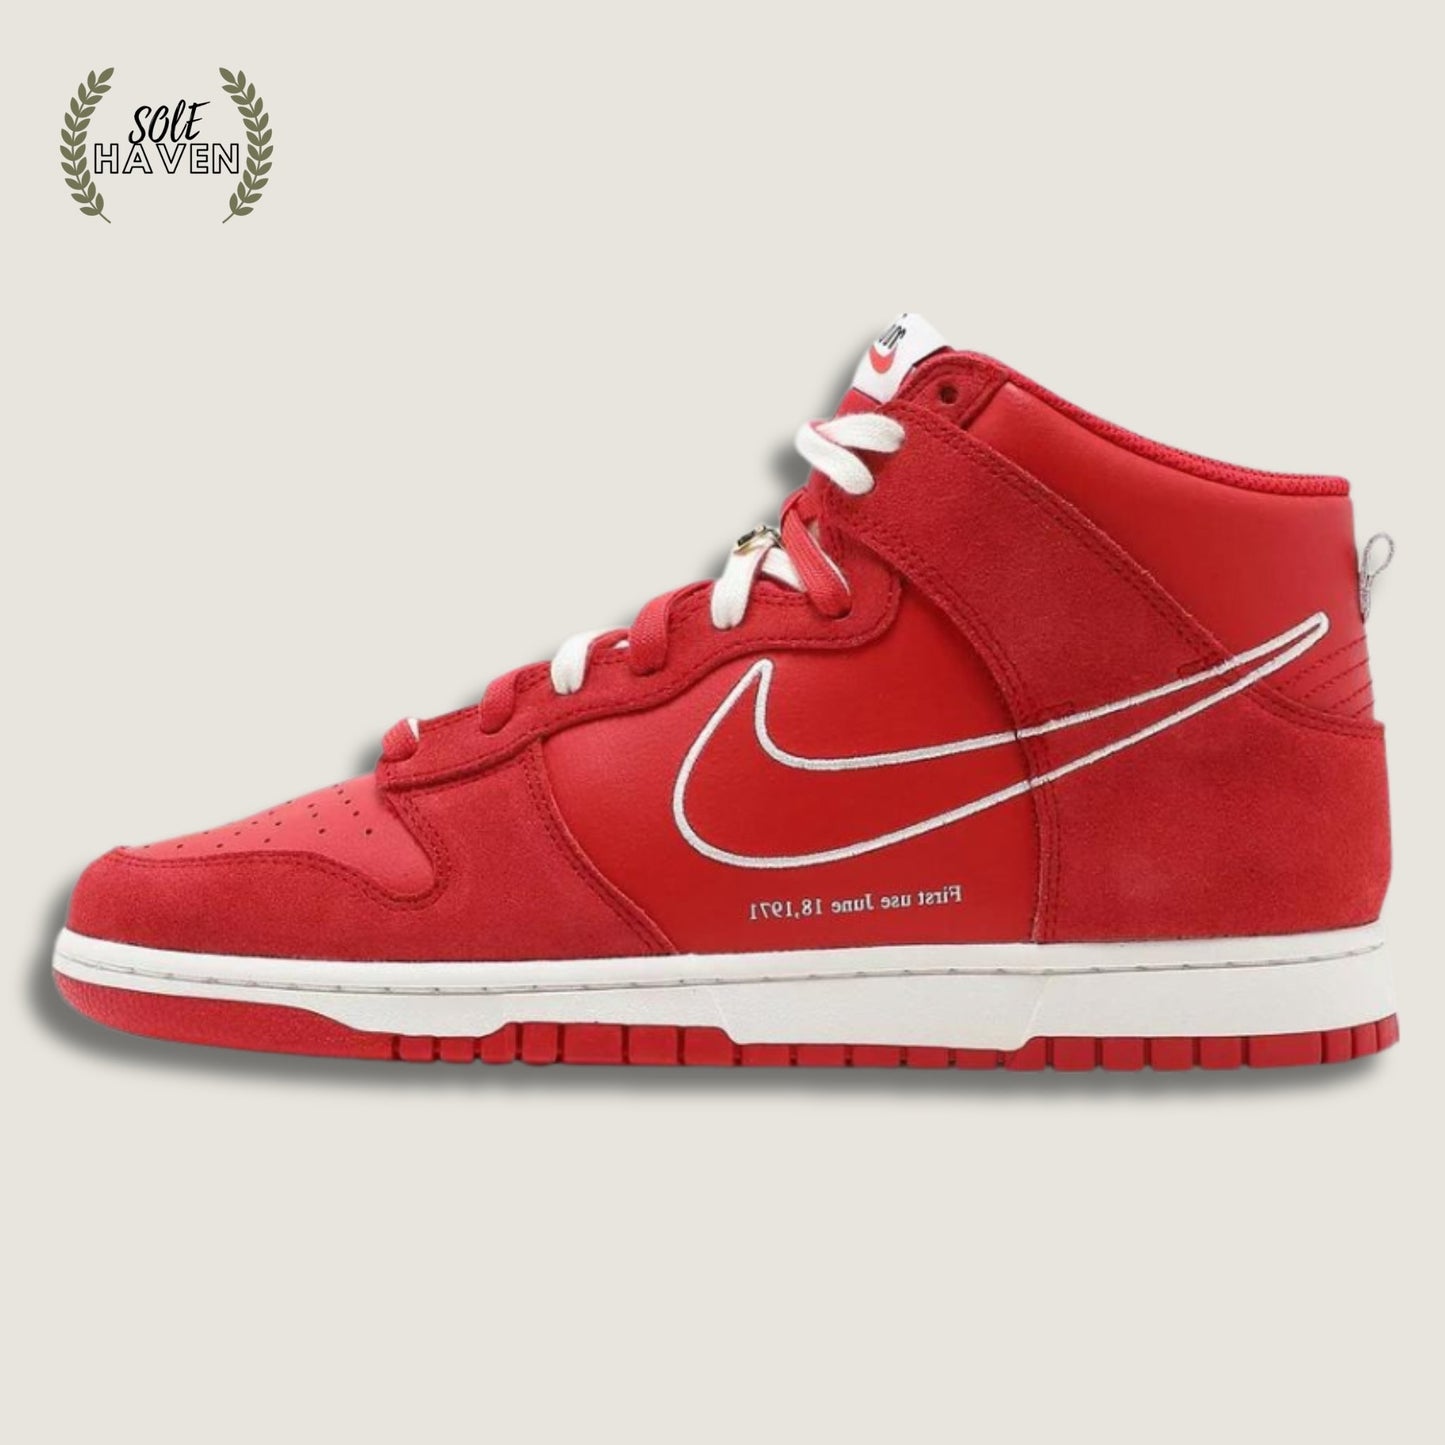 Dunk High SE 'First Use Pack - University Red' - Sole HavenShoesNike